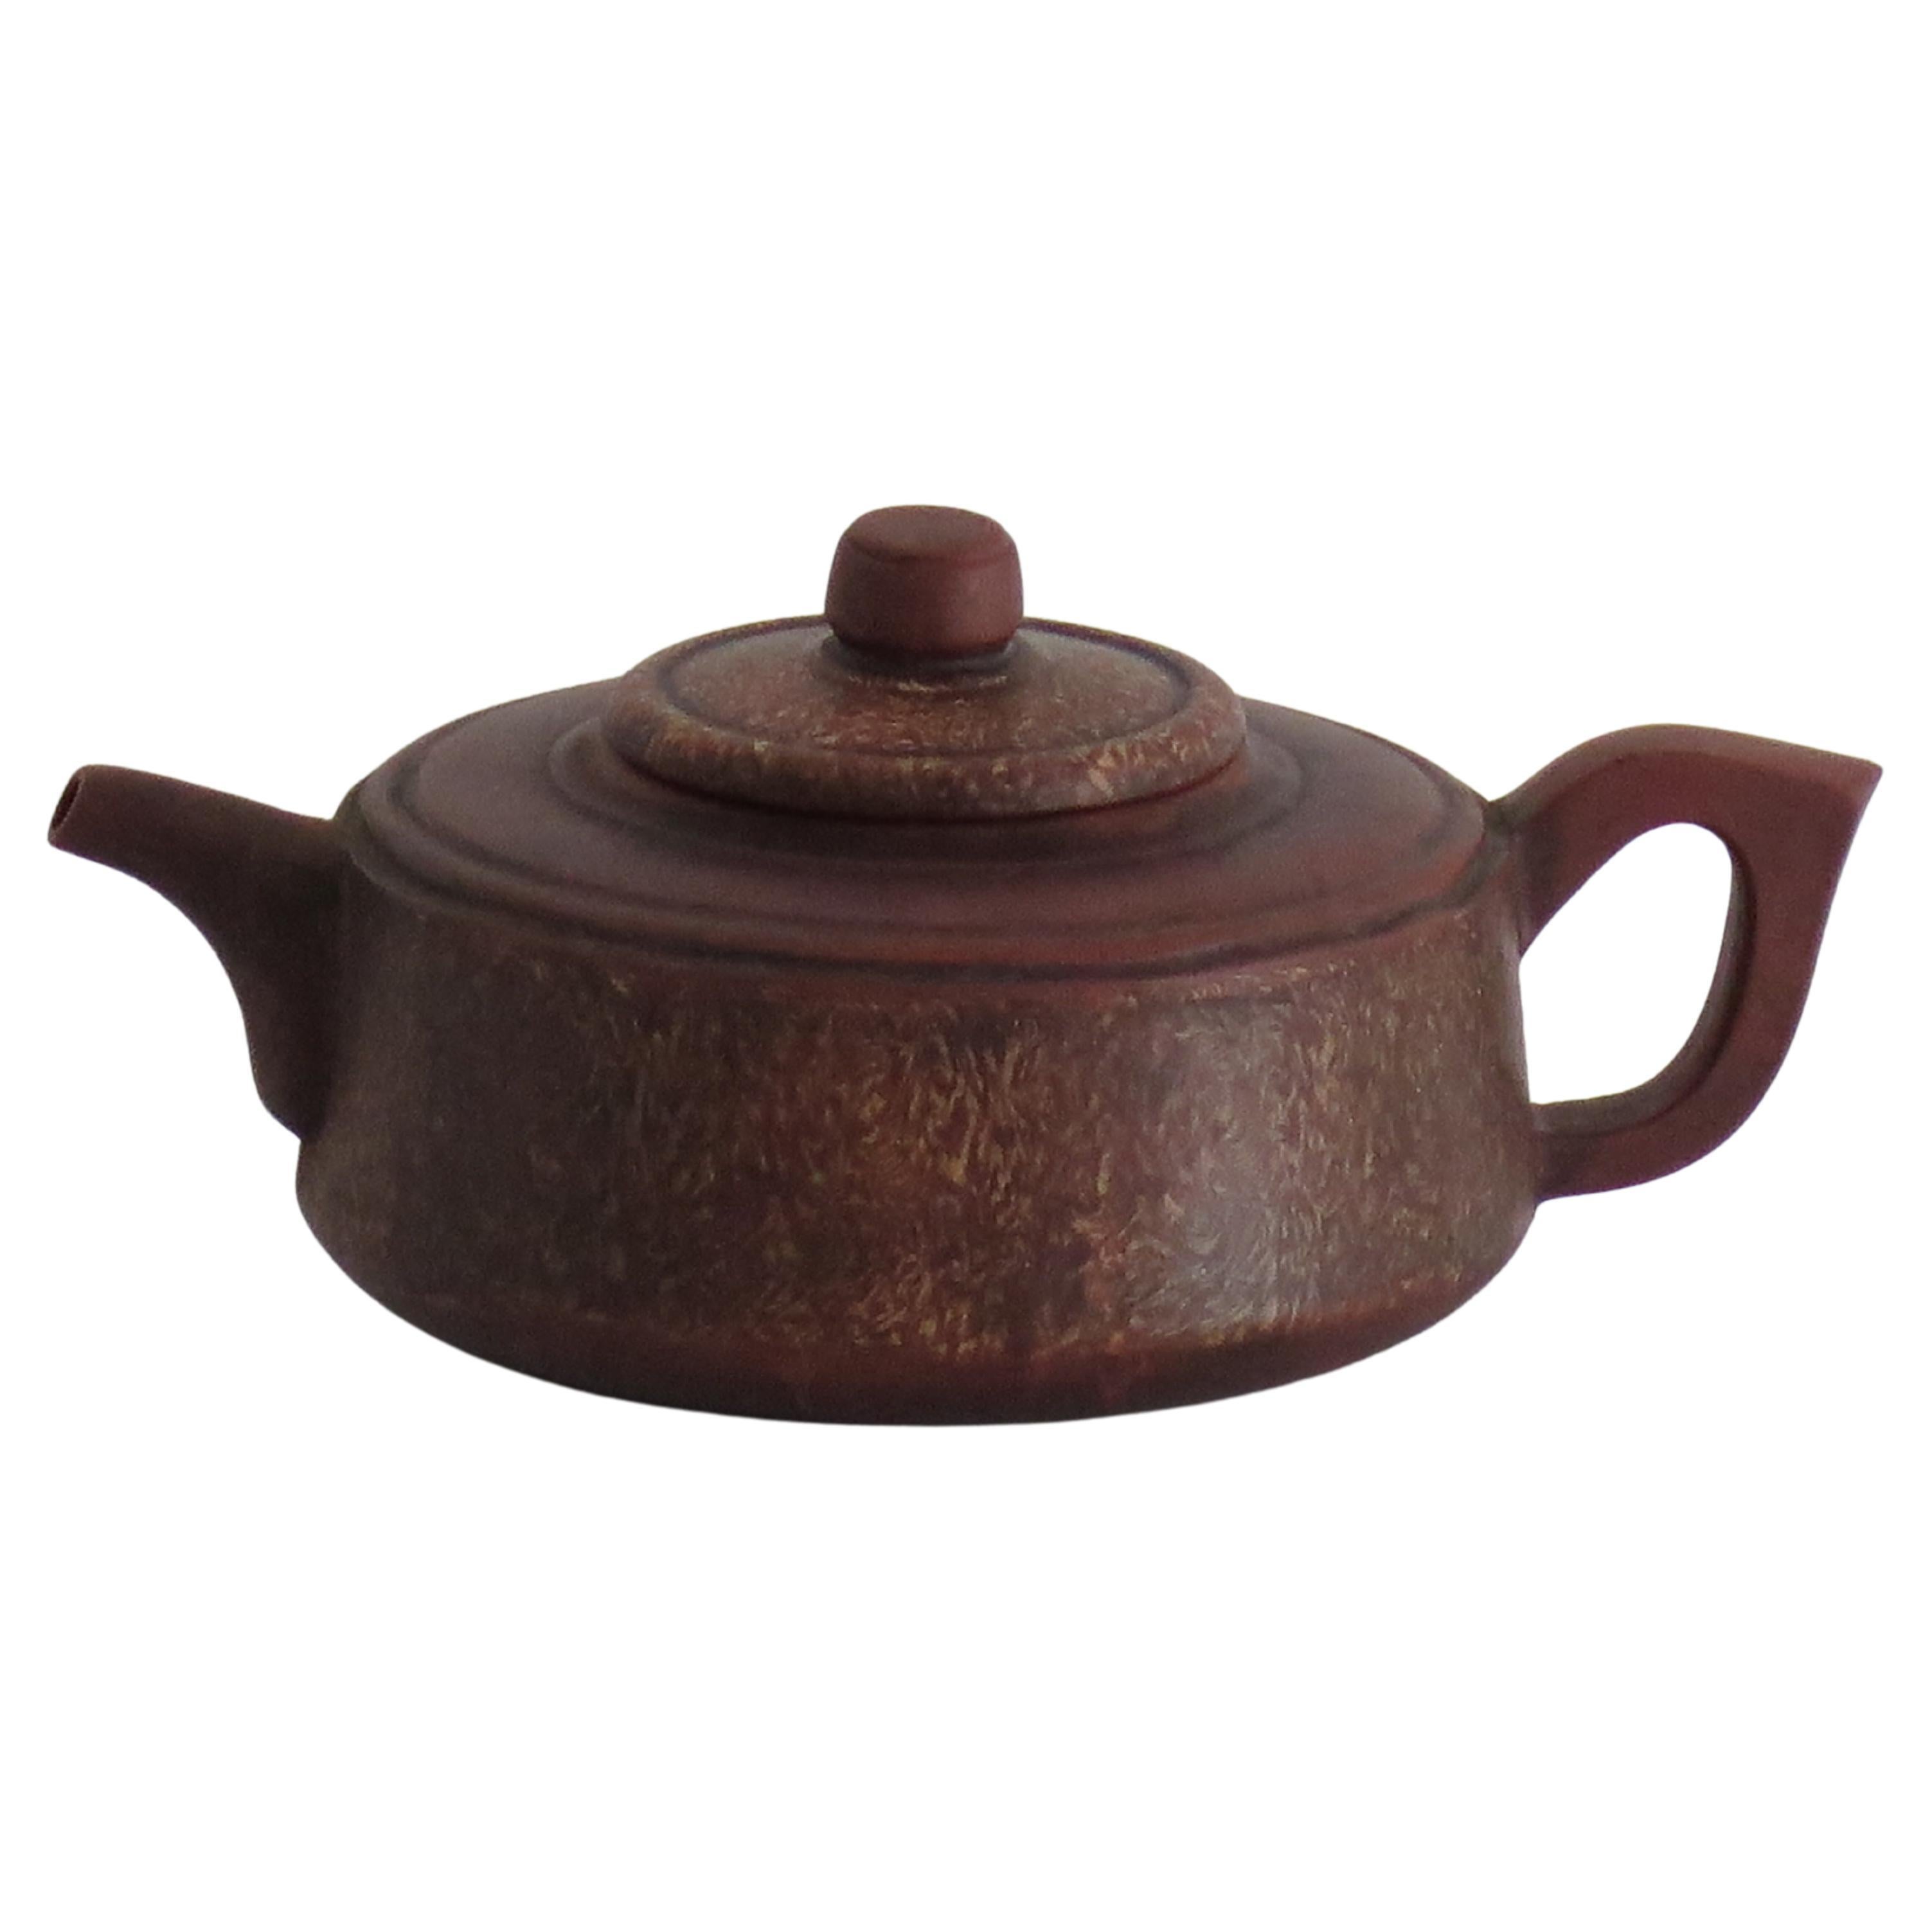 This is an antique Chinese hand potted Red Clay YIXING Teapot and cover, fully marked and dating  to the early 20th Century.

The Teapot and lid are hand-potted in an interesting compressed squat shape and made of Red Clay stoneware. The lid has a